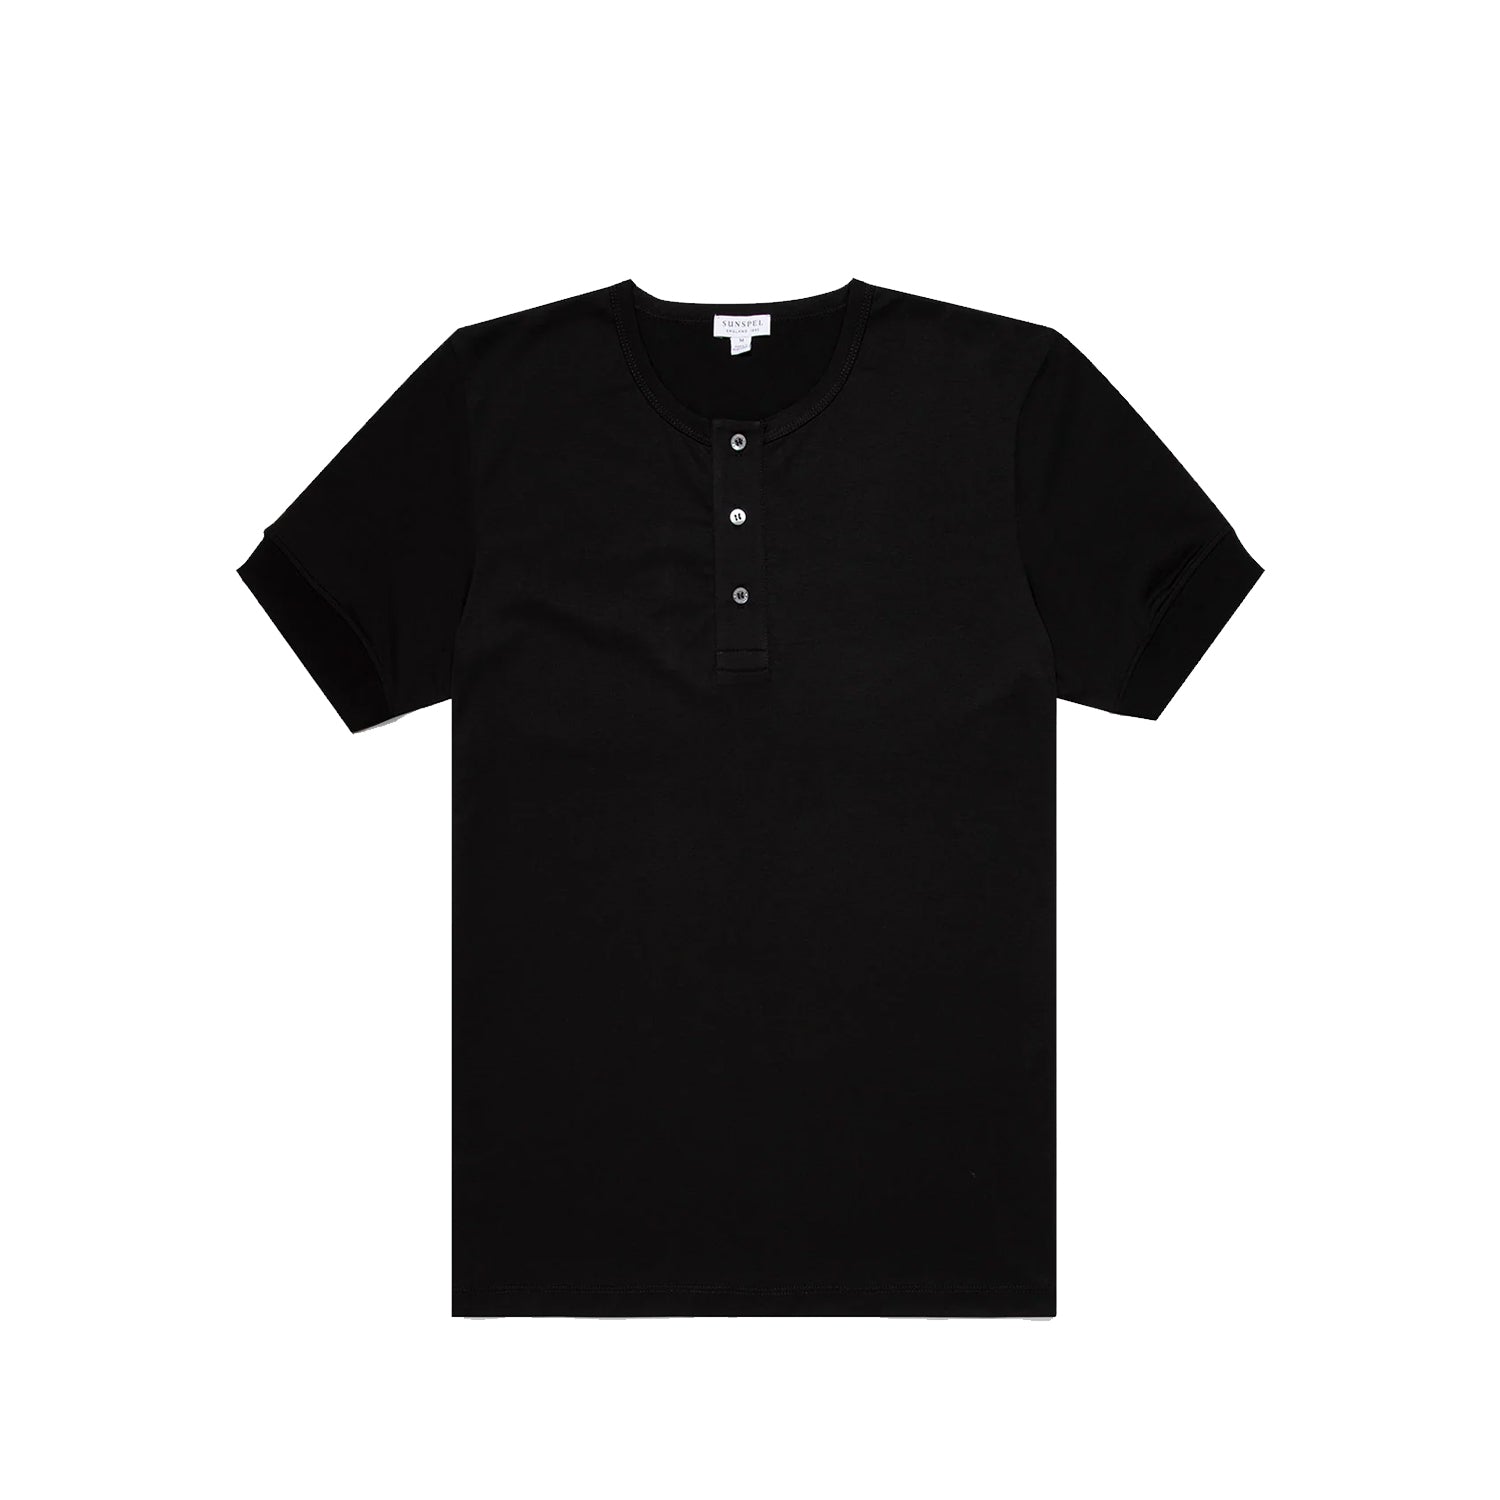 Henley T-Shirt BLACK
This is the contemporary British take on the classic Henley T-shirt. Made in Sunspots ultra-light long staple Supima cotton – the same fabric as the classic T-shirts – it has a wider rib cuff and refined trocas button placket, both taken from pieces in the archive. The fit is regular.
Henley shirts were traditional English 19th century rowing shirts, reminiscent of early Sunspel shirts, given a new lease of life in the late 20th century. This is a classic understated version. SUNSPEL